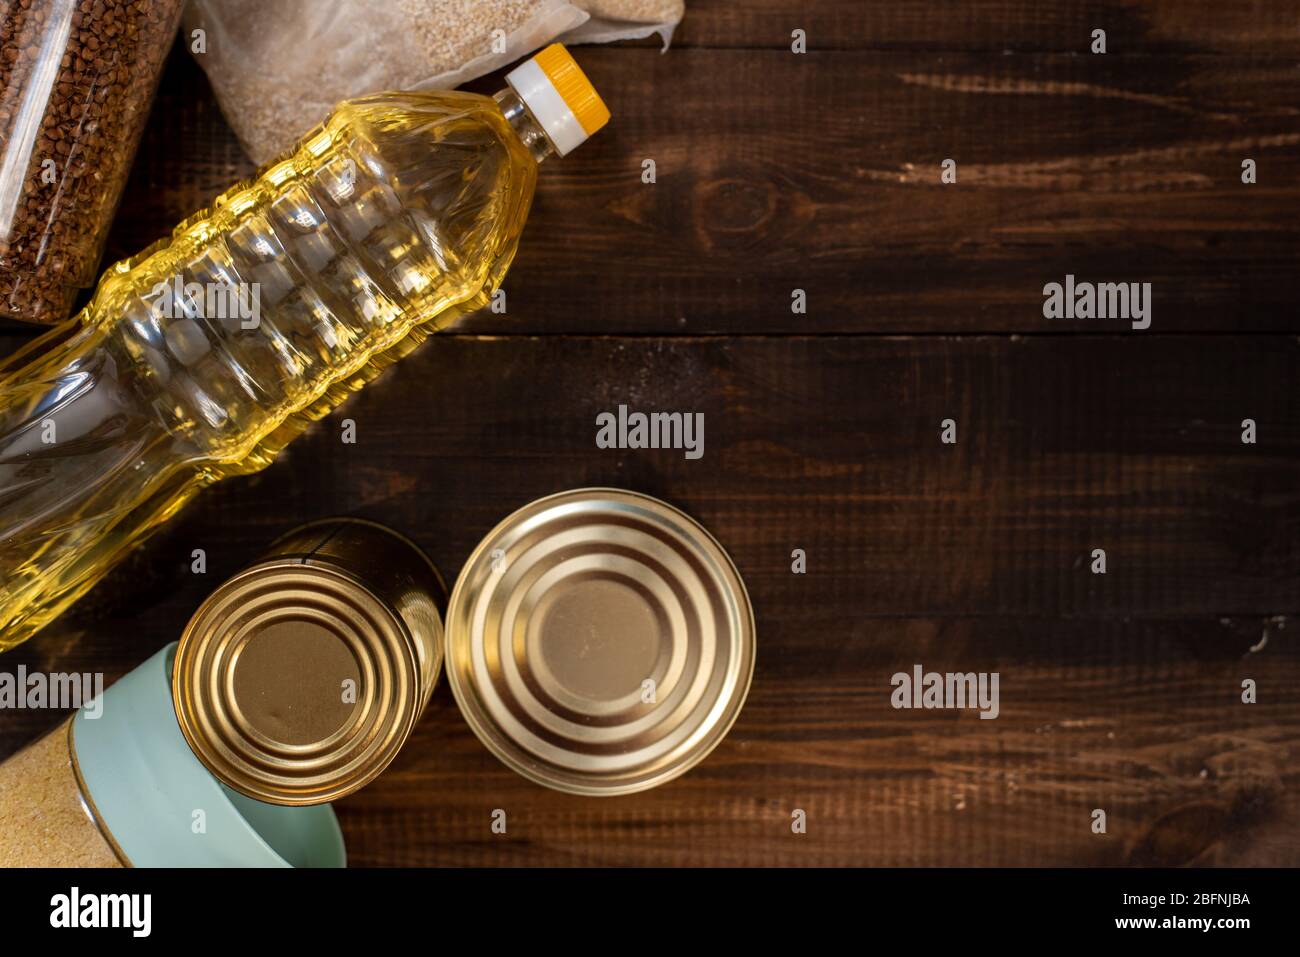 Cereals, various products, canned food, pasta and soap on a wooden background with place for text. Humanitarian assistance during the coronavirus pand Stock Photo